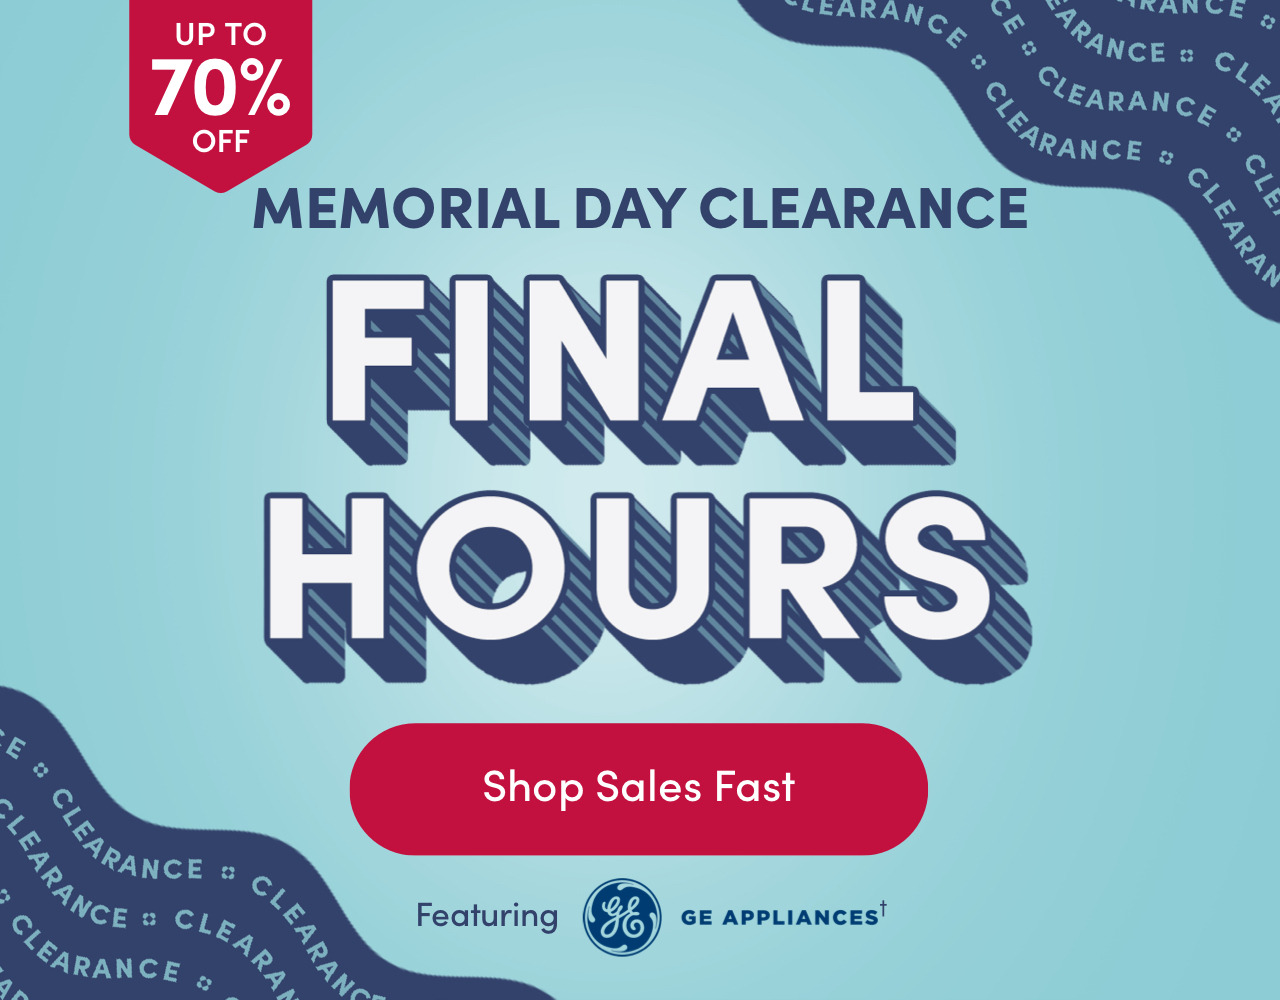 Memorial Day Clearance